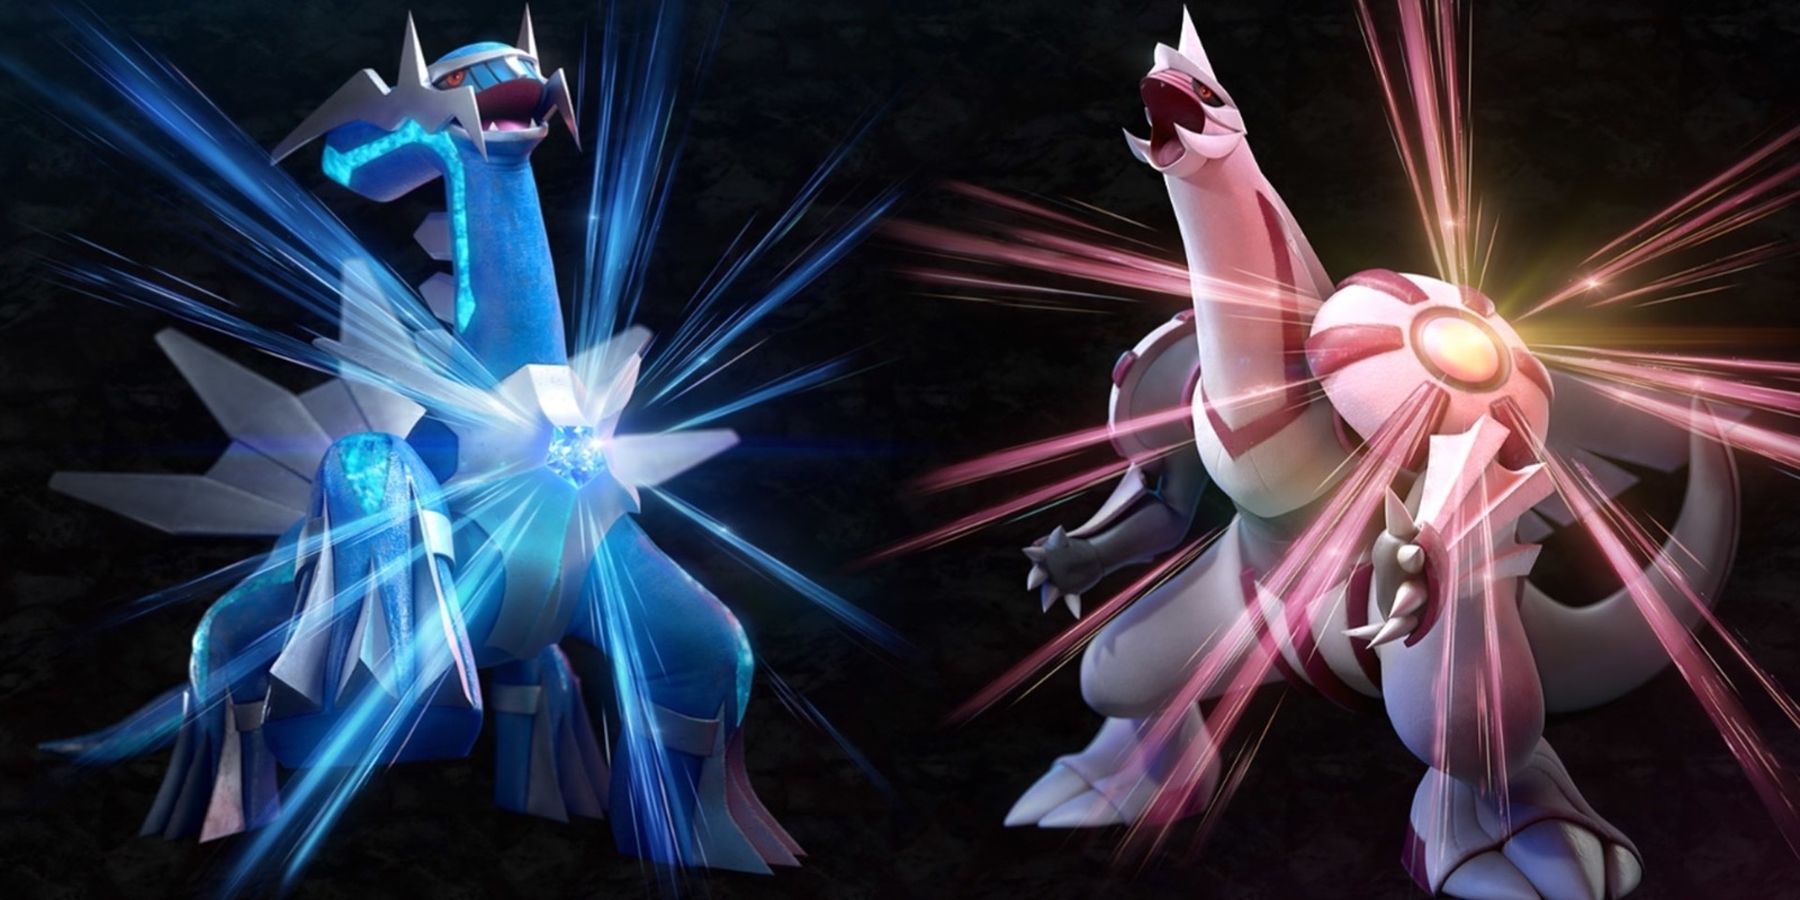 Pokemon Brilliant Diamond And Shining Pearl Update 1 2 0 Adds New Colosseum Battle Feature And More